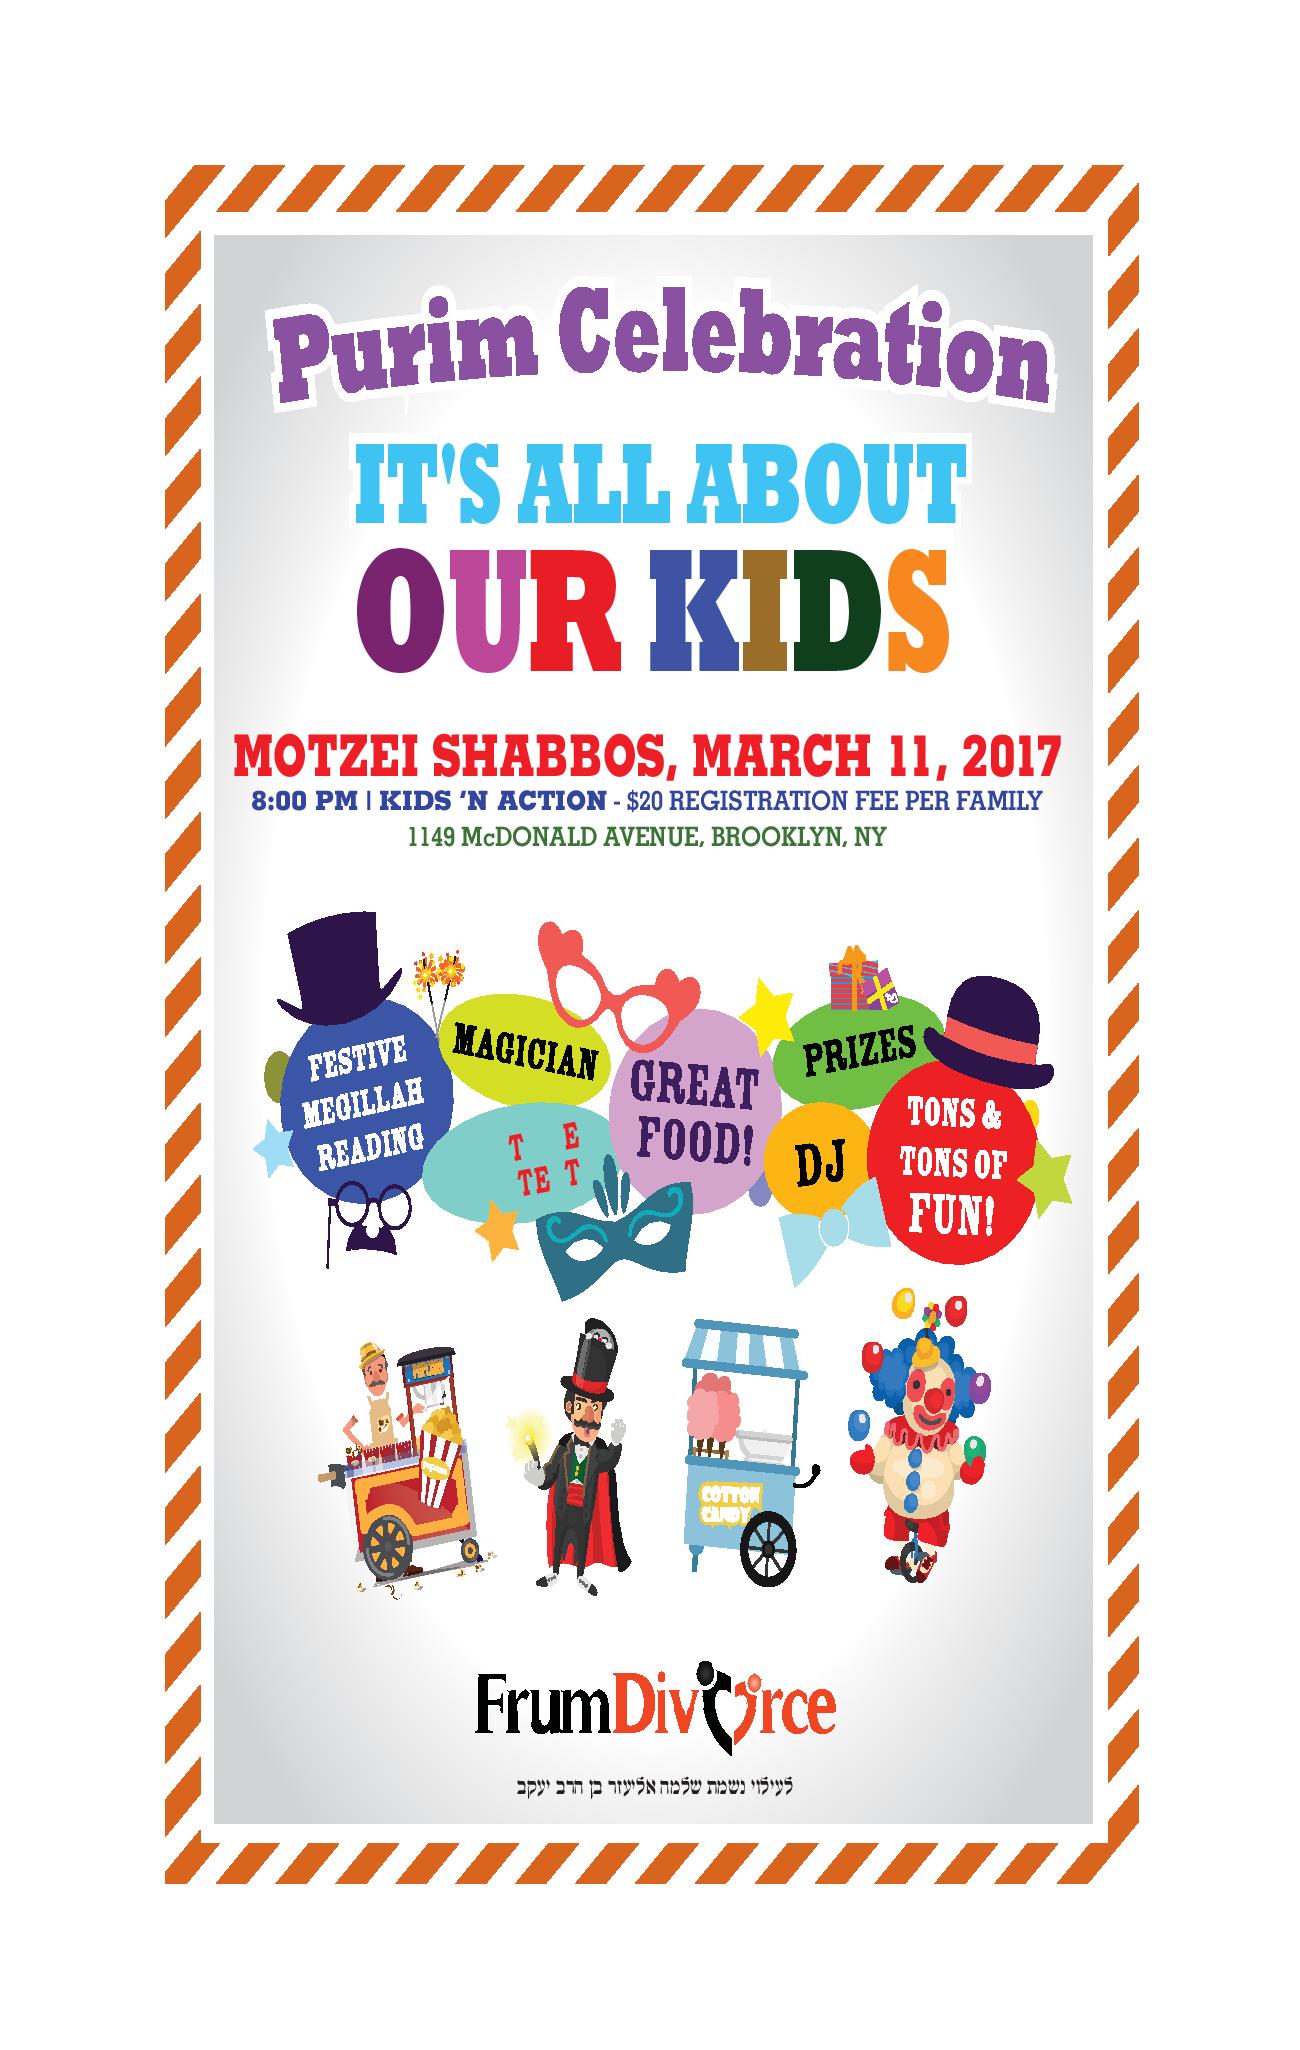 Purim Celebration: It's All About Our Kids